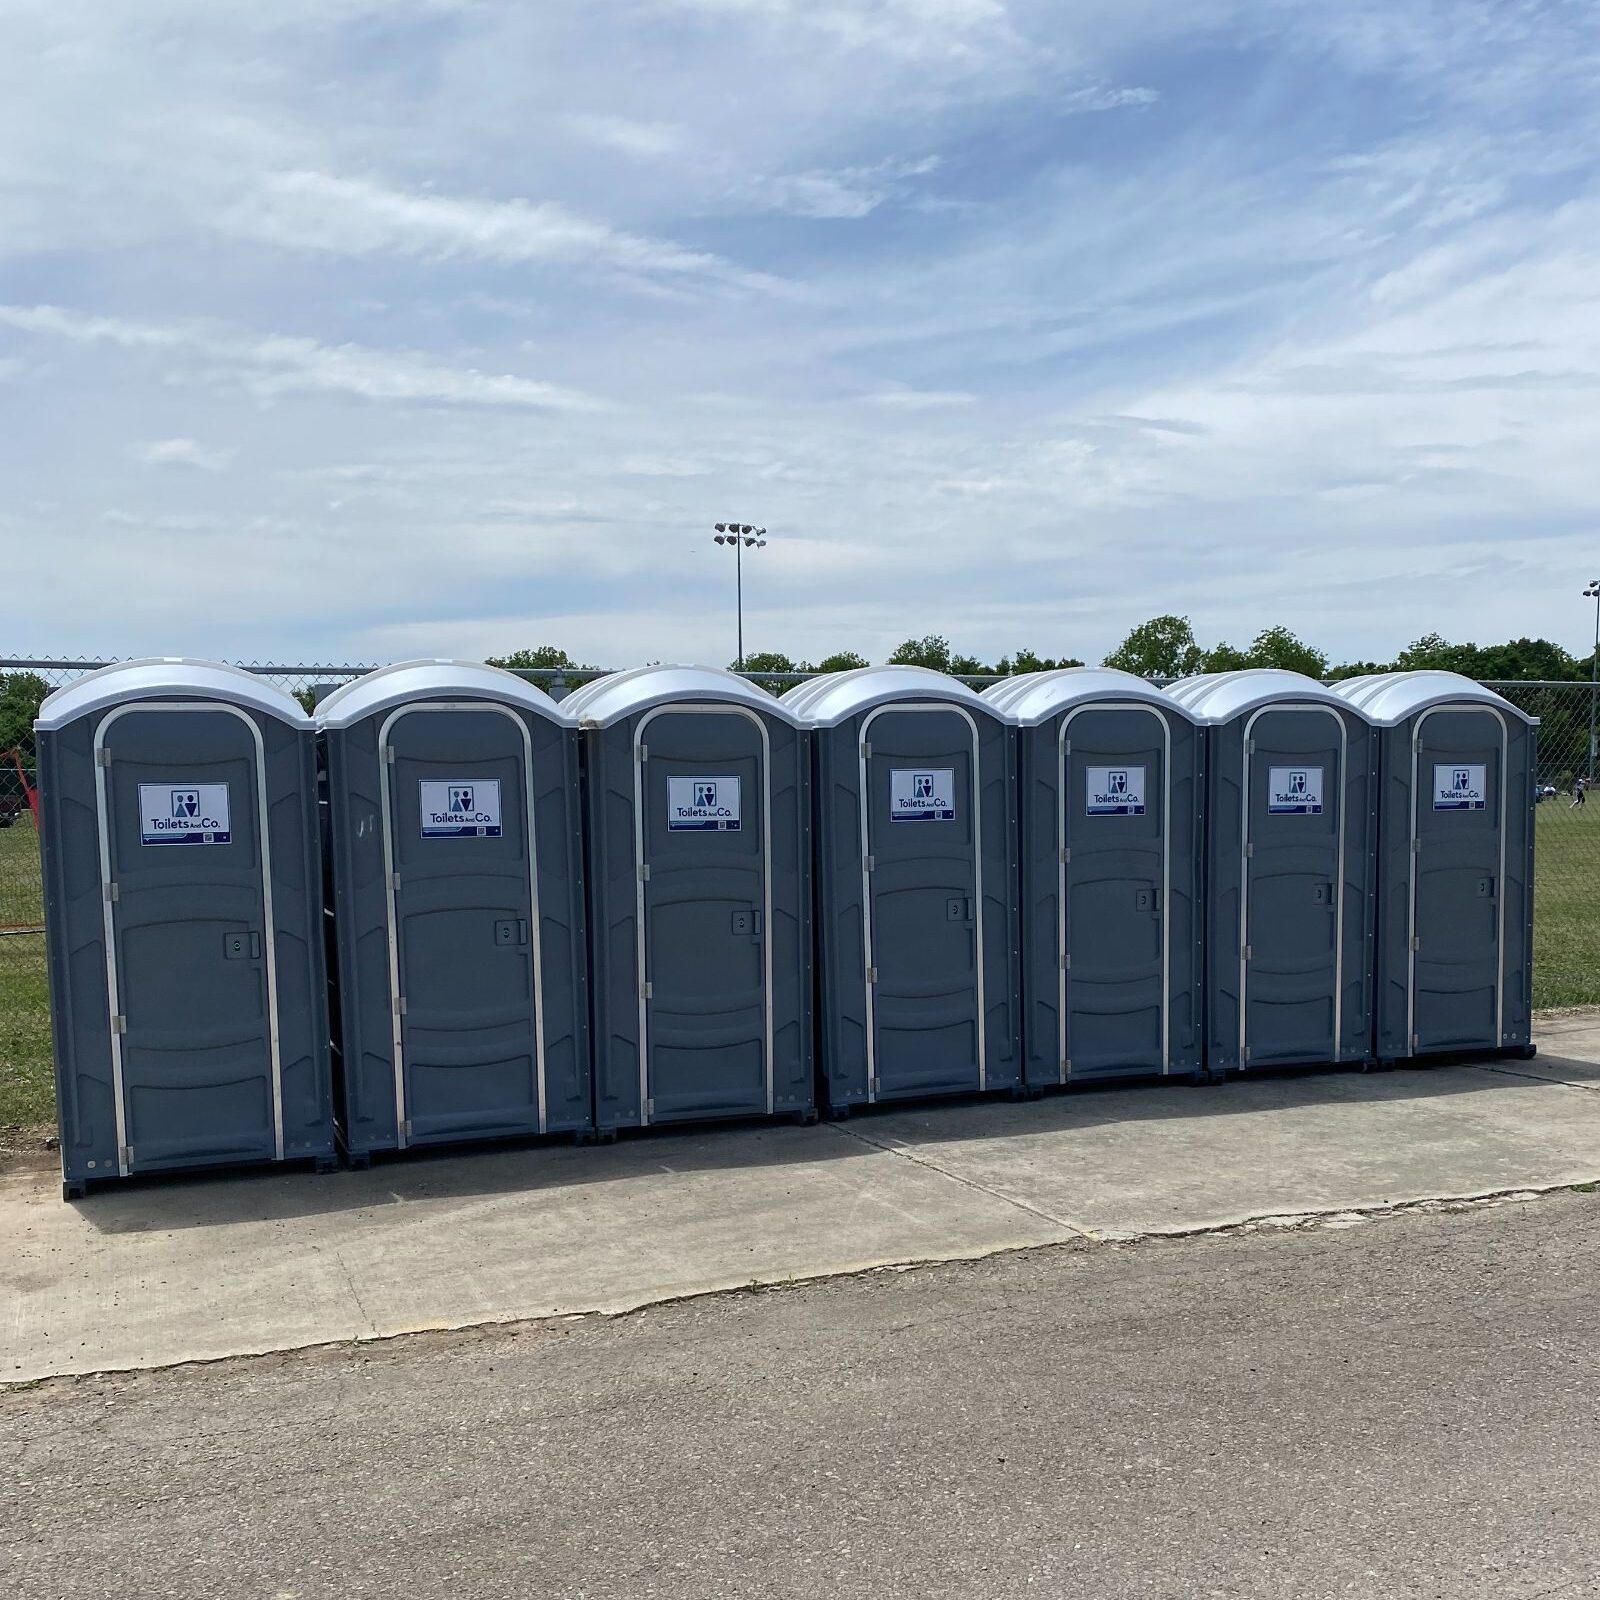 A line of standard portable toilet units for a large outdoor event.